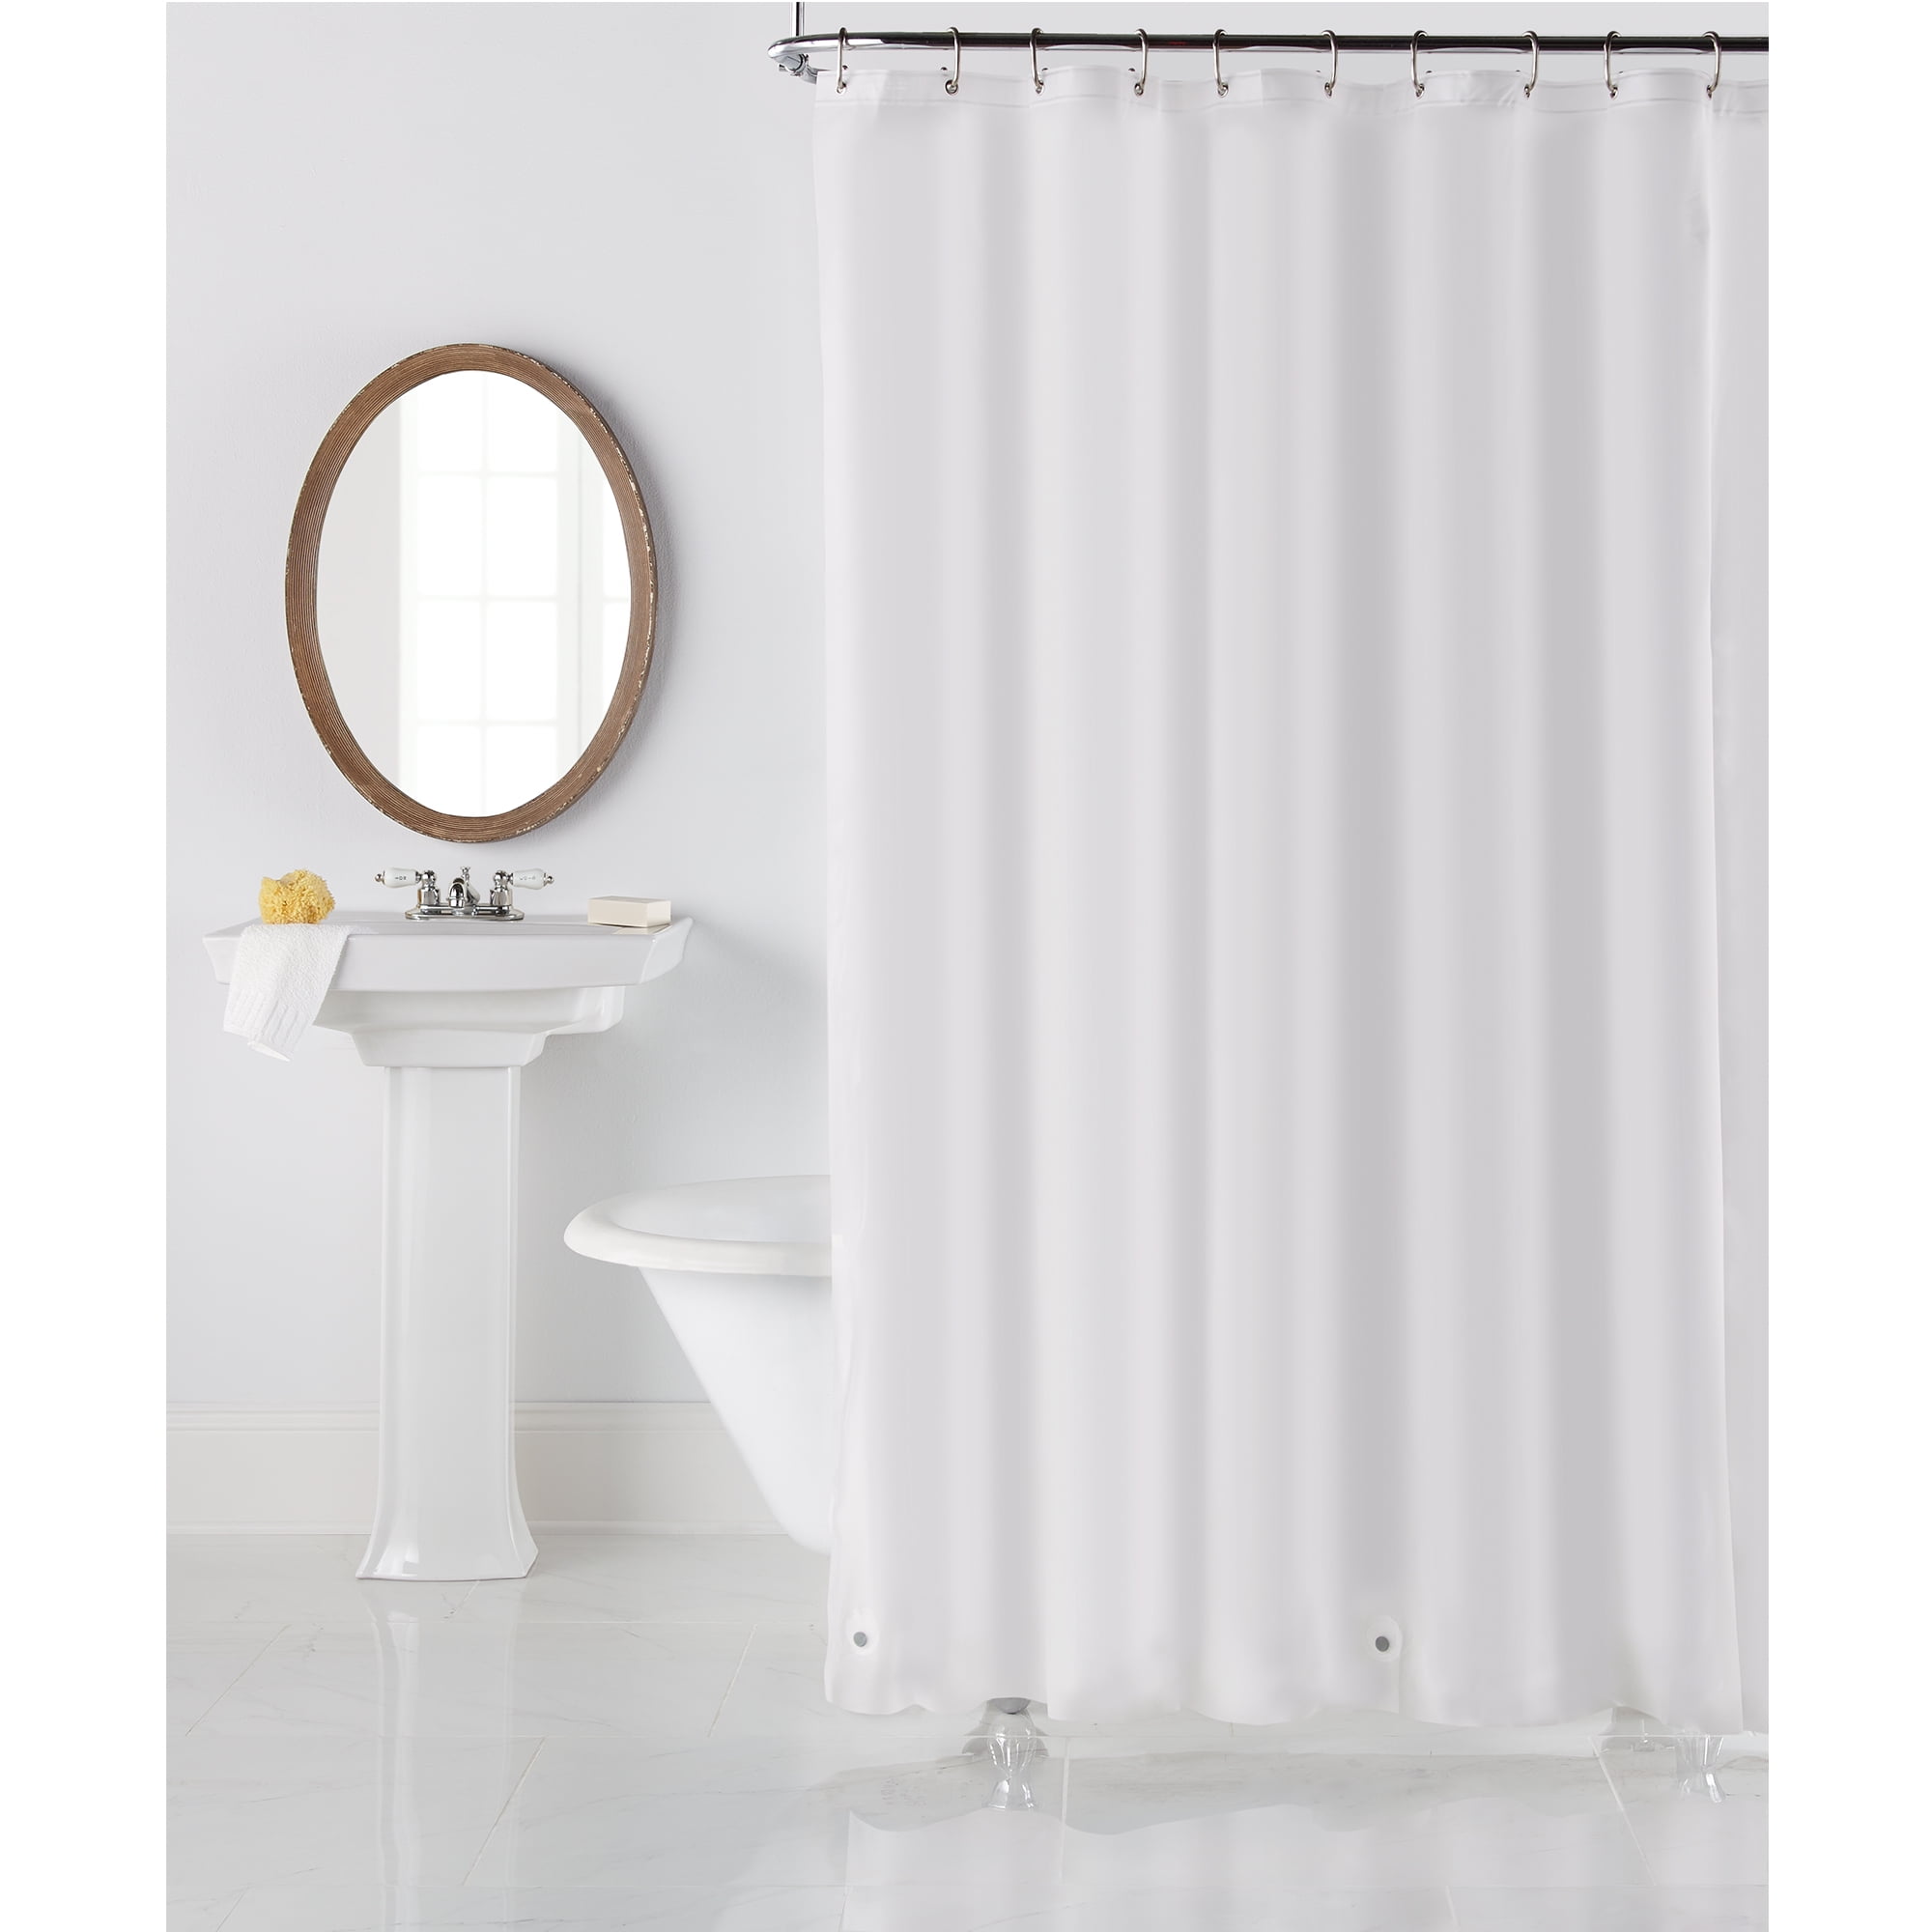 Excell Heavy Weight Peva Shower Liner, Excel Mildew Resistant Peva 70 X 72 Shower Curtain Liner